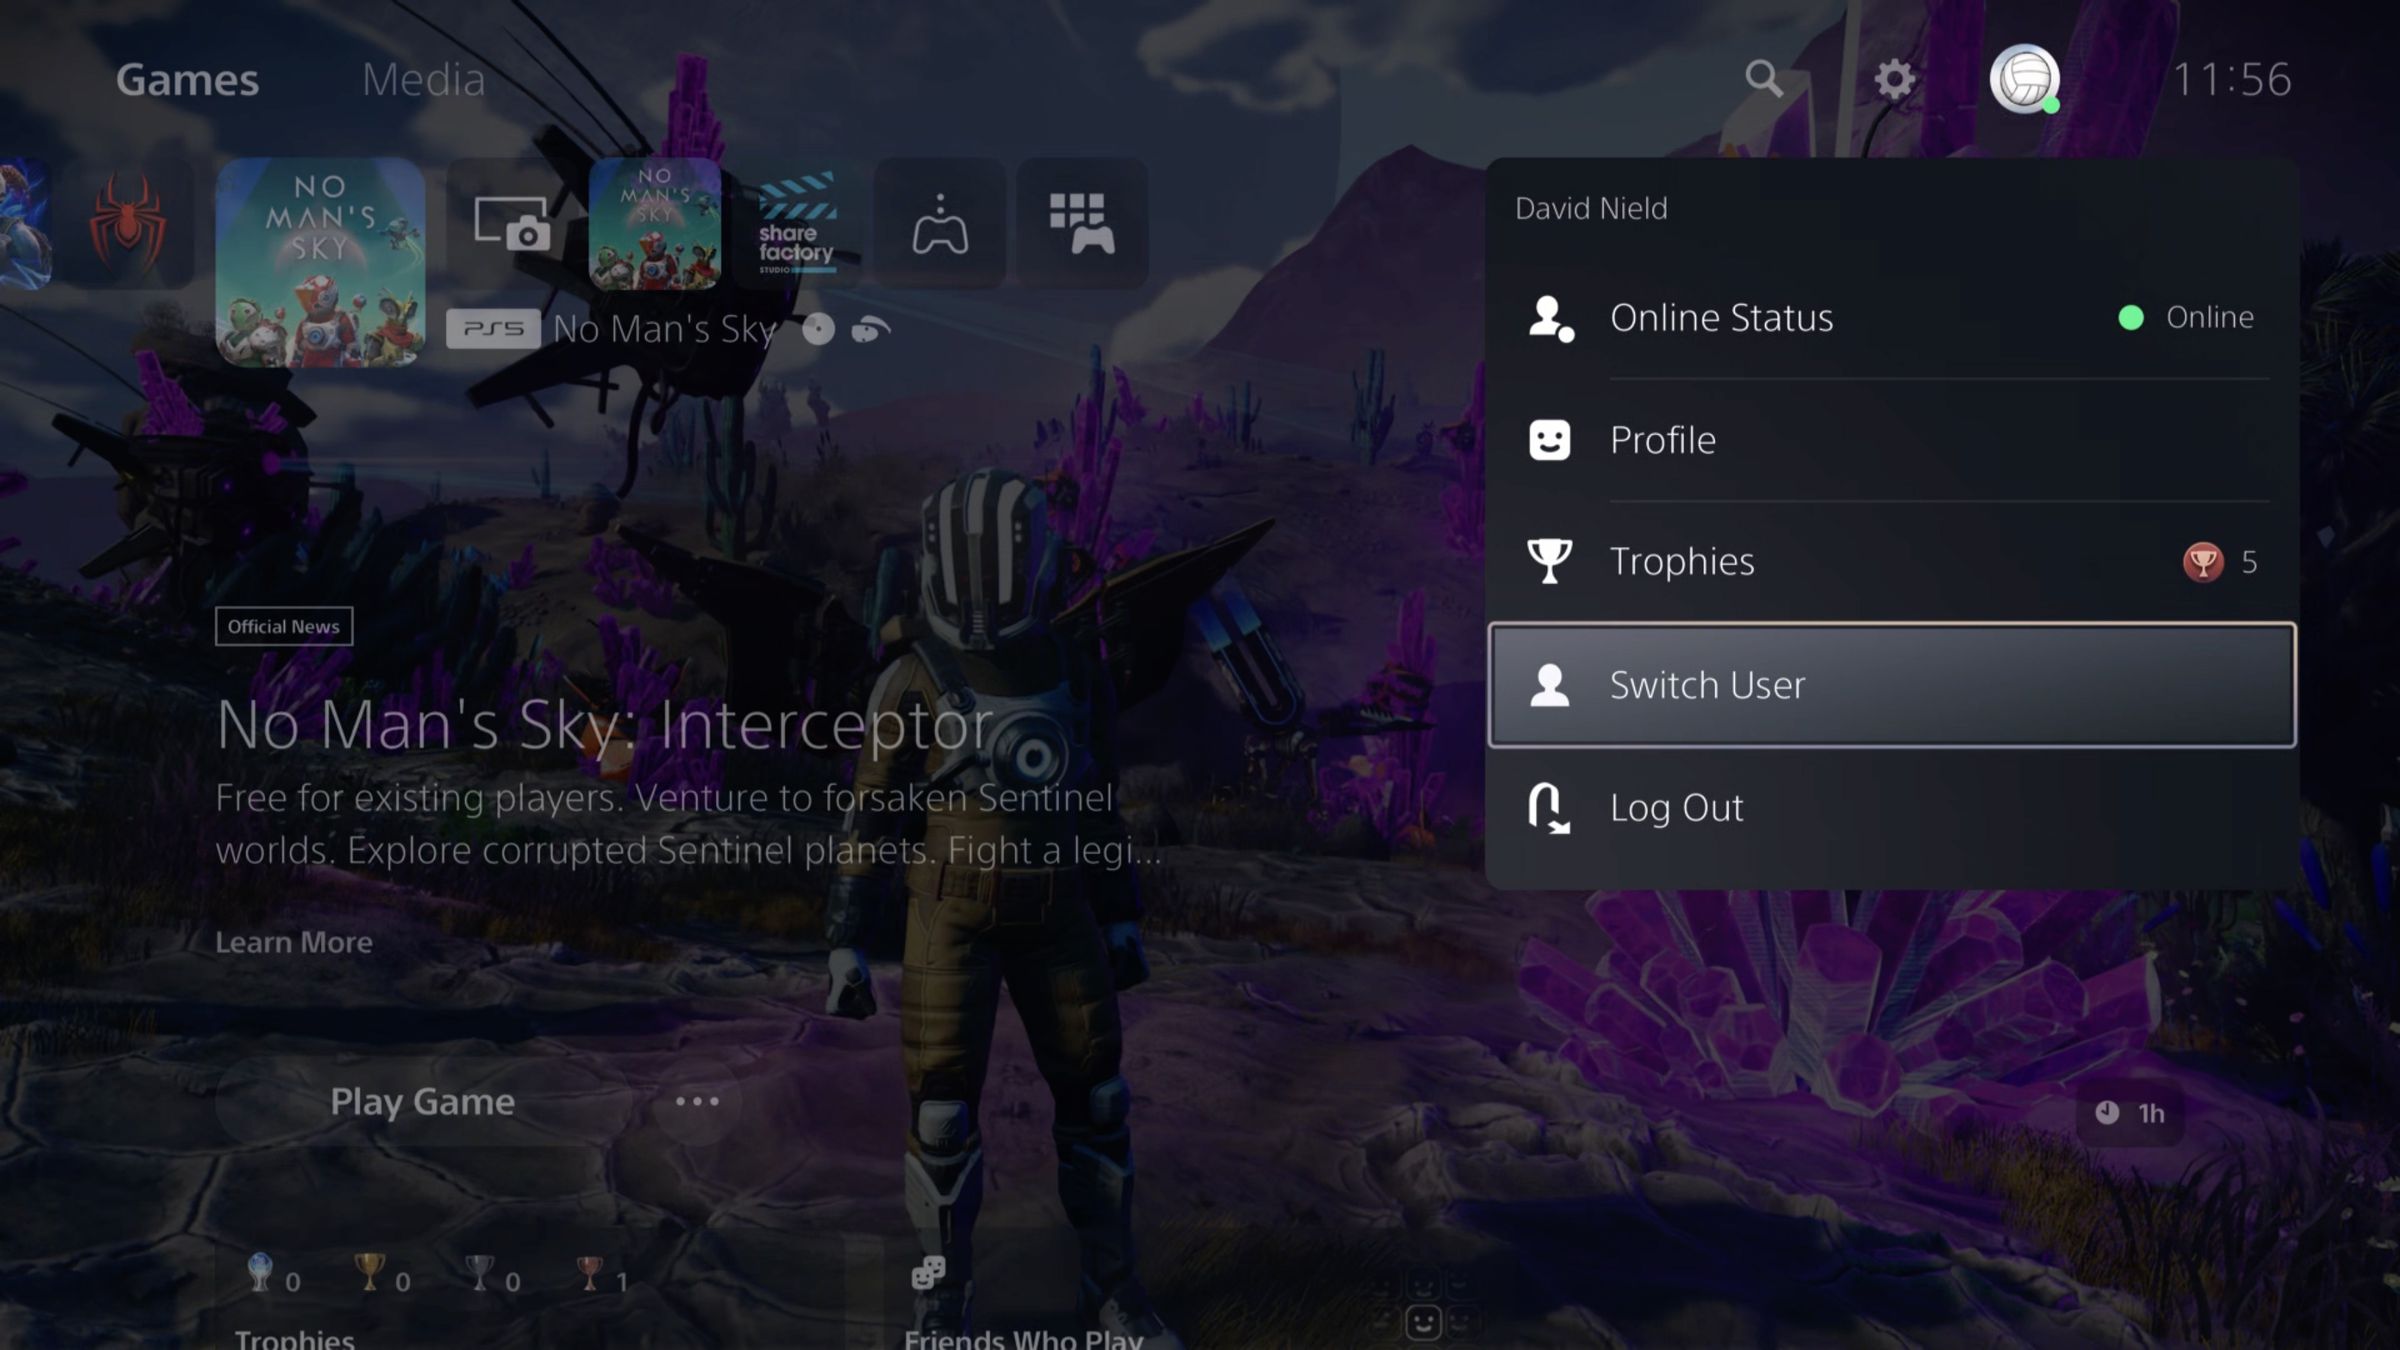 Dark PS5 screen with window listing Online Status, Profile, Trophies, Switch User, Log Out